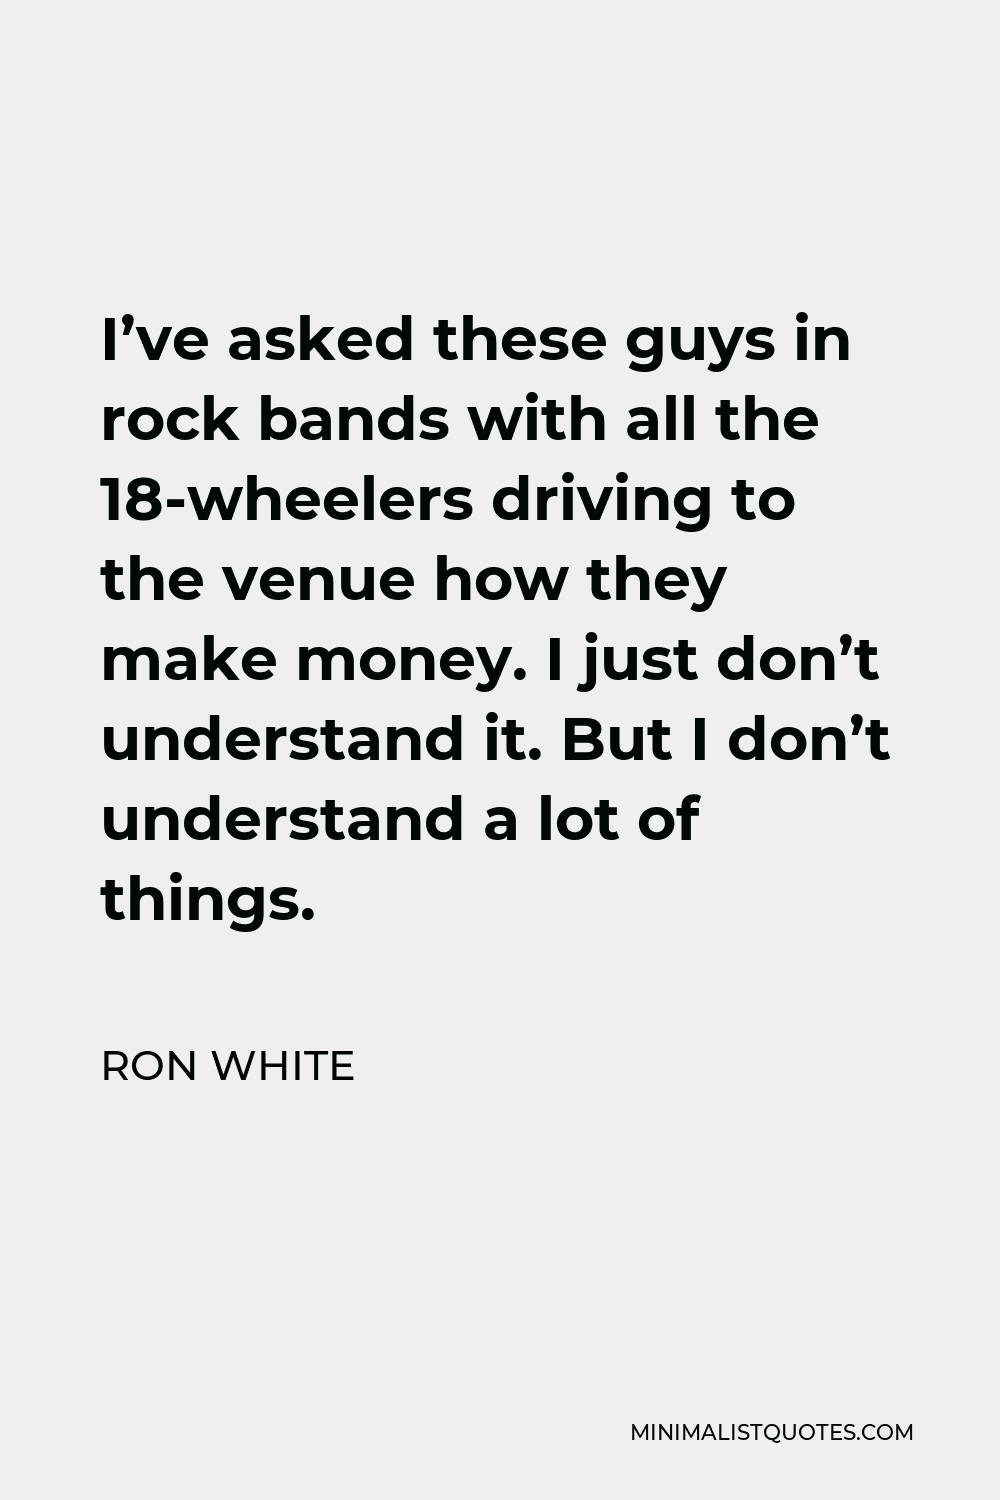 Ron White Quote - I’ve asked these guys in rock bands with all the 18-wheelers driving to the venue how they make money. I just don’t understand it. But I don’t understand a lot of things.